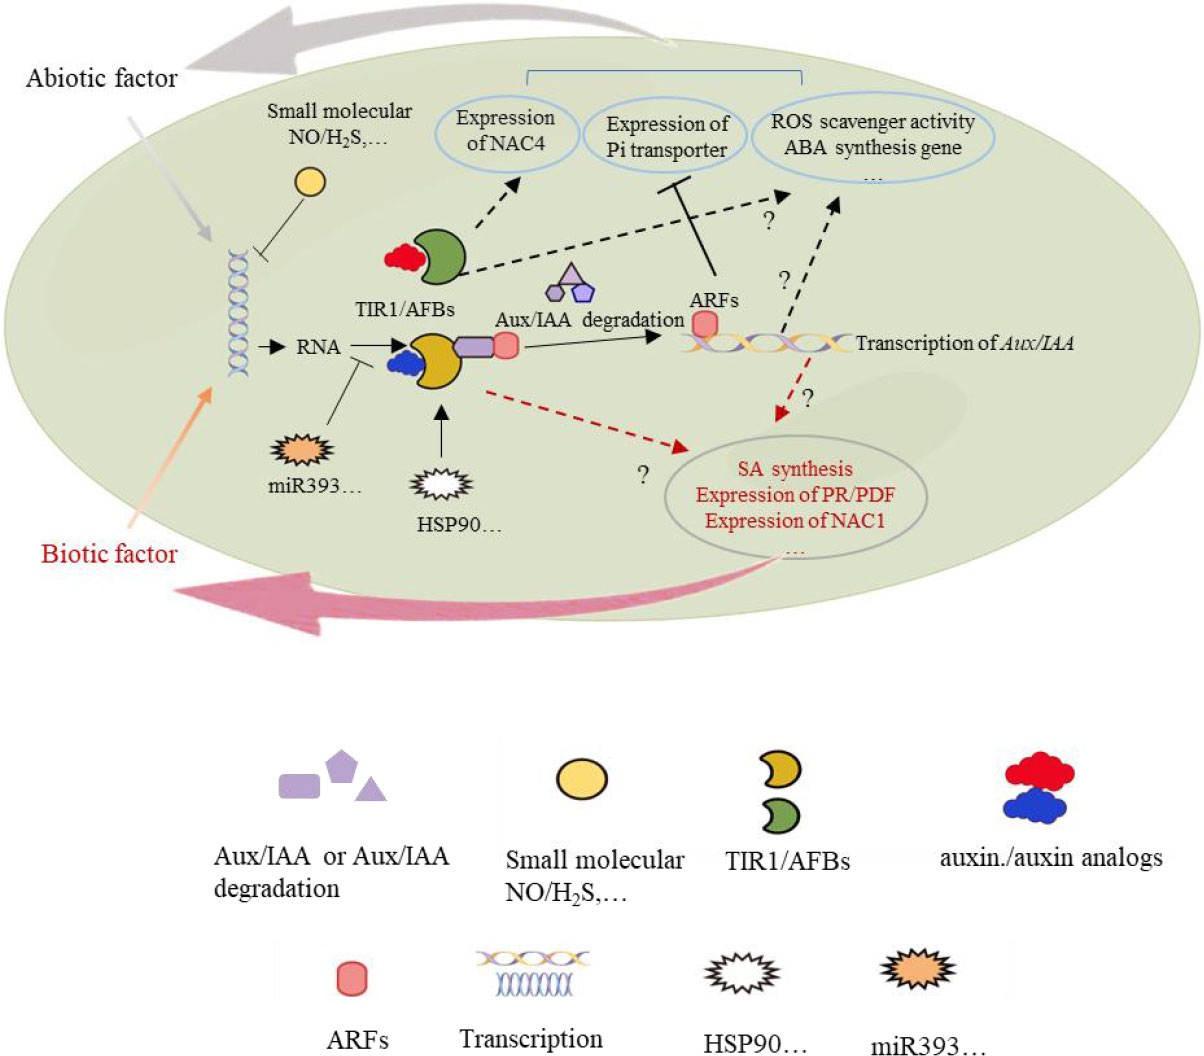 Frontiers | TIR1/AFB proteins: Active players in abiotic and 